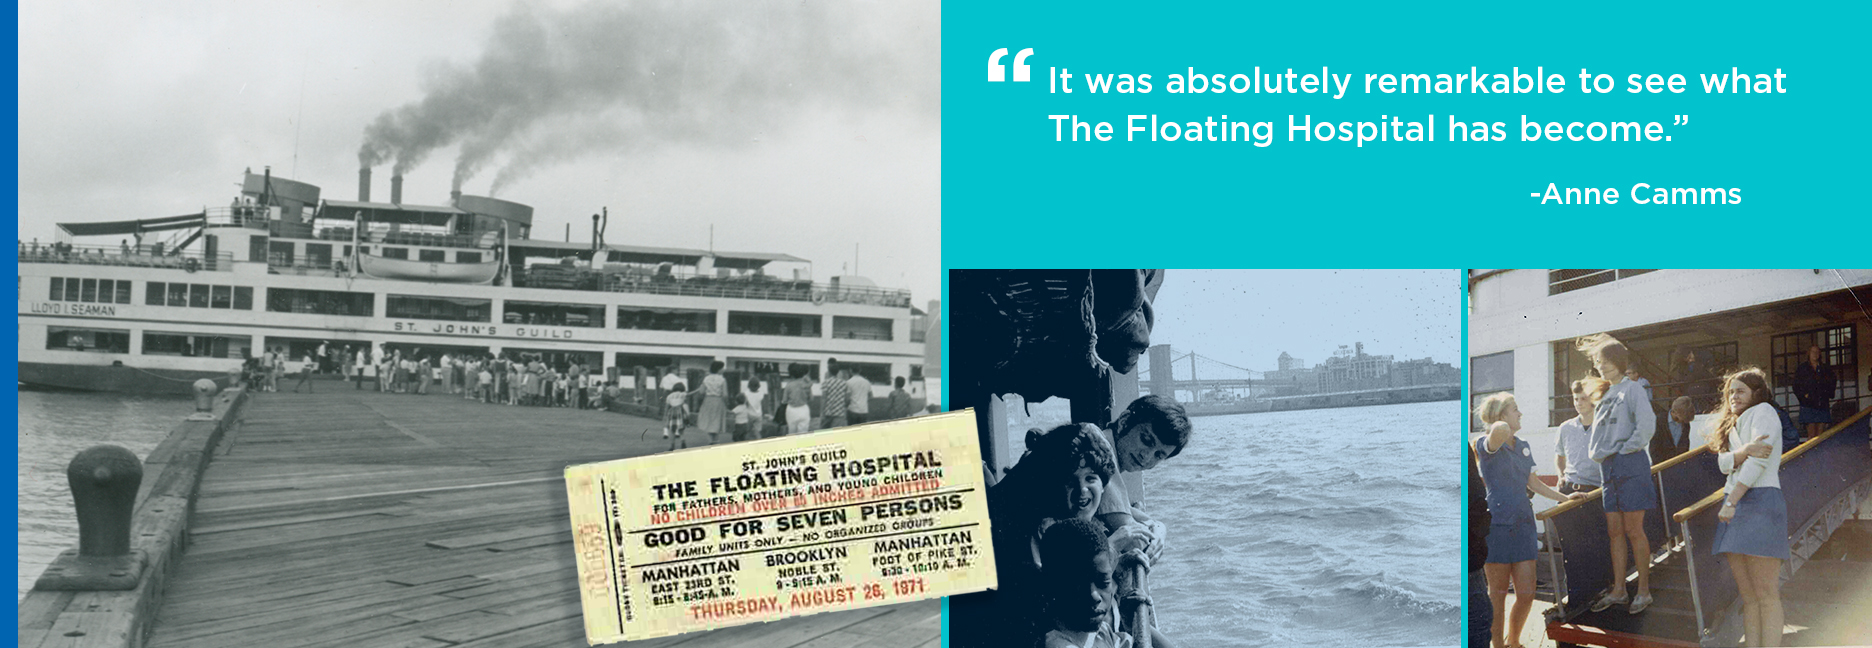 images of the old floating hospital ship and pull quote